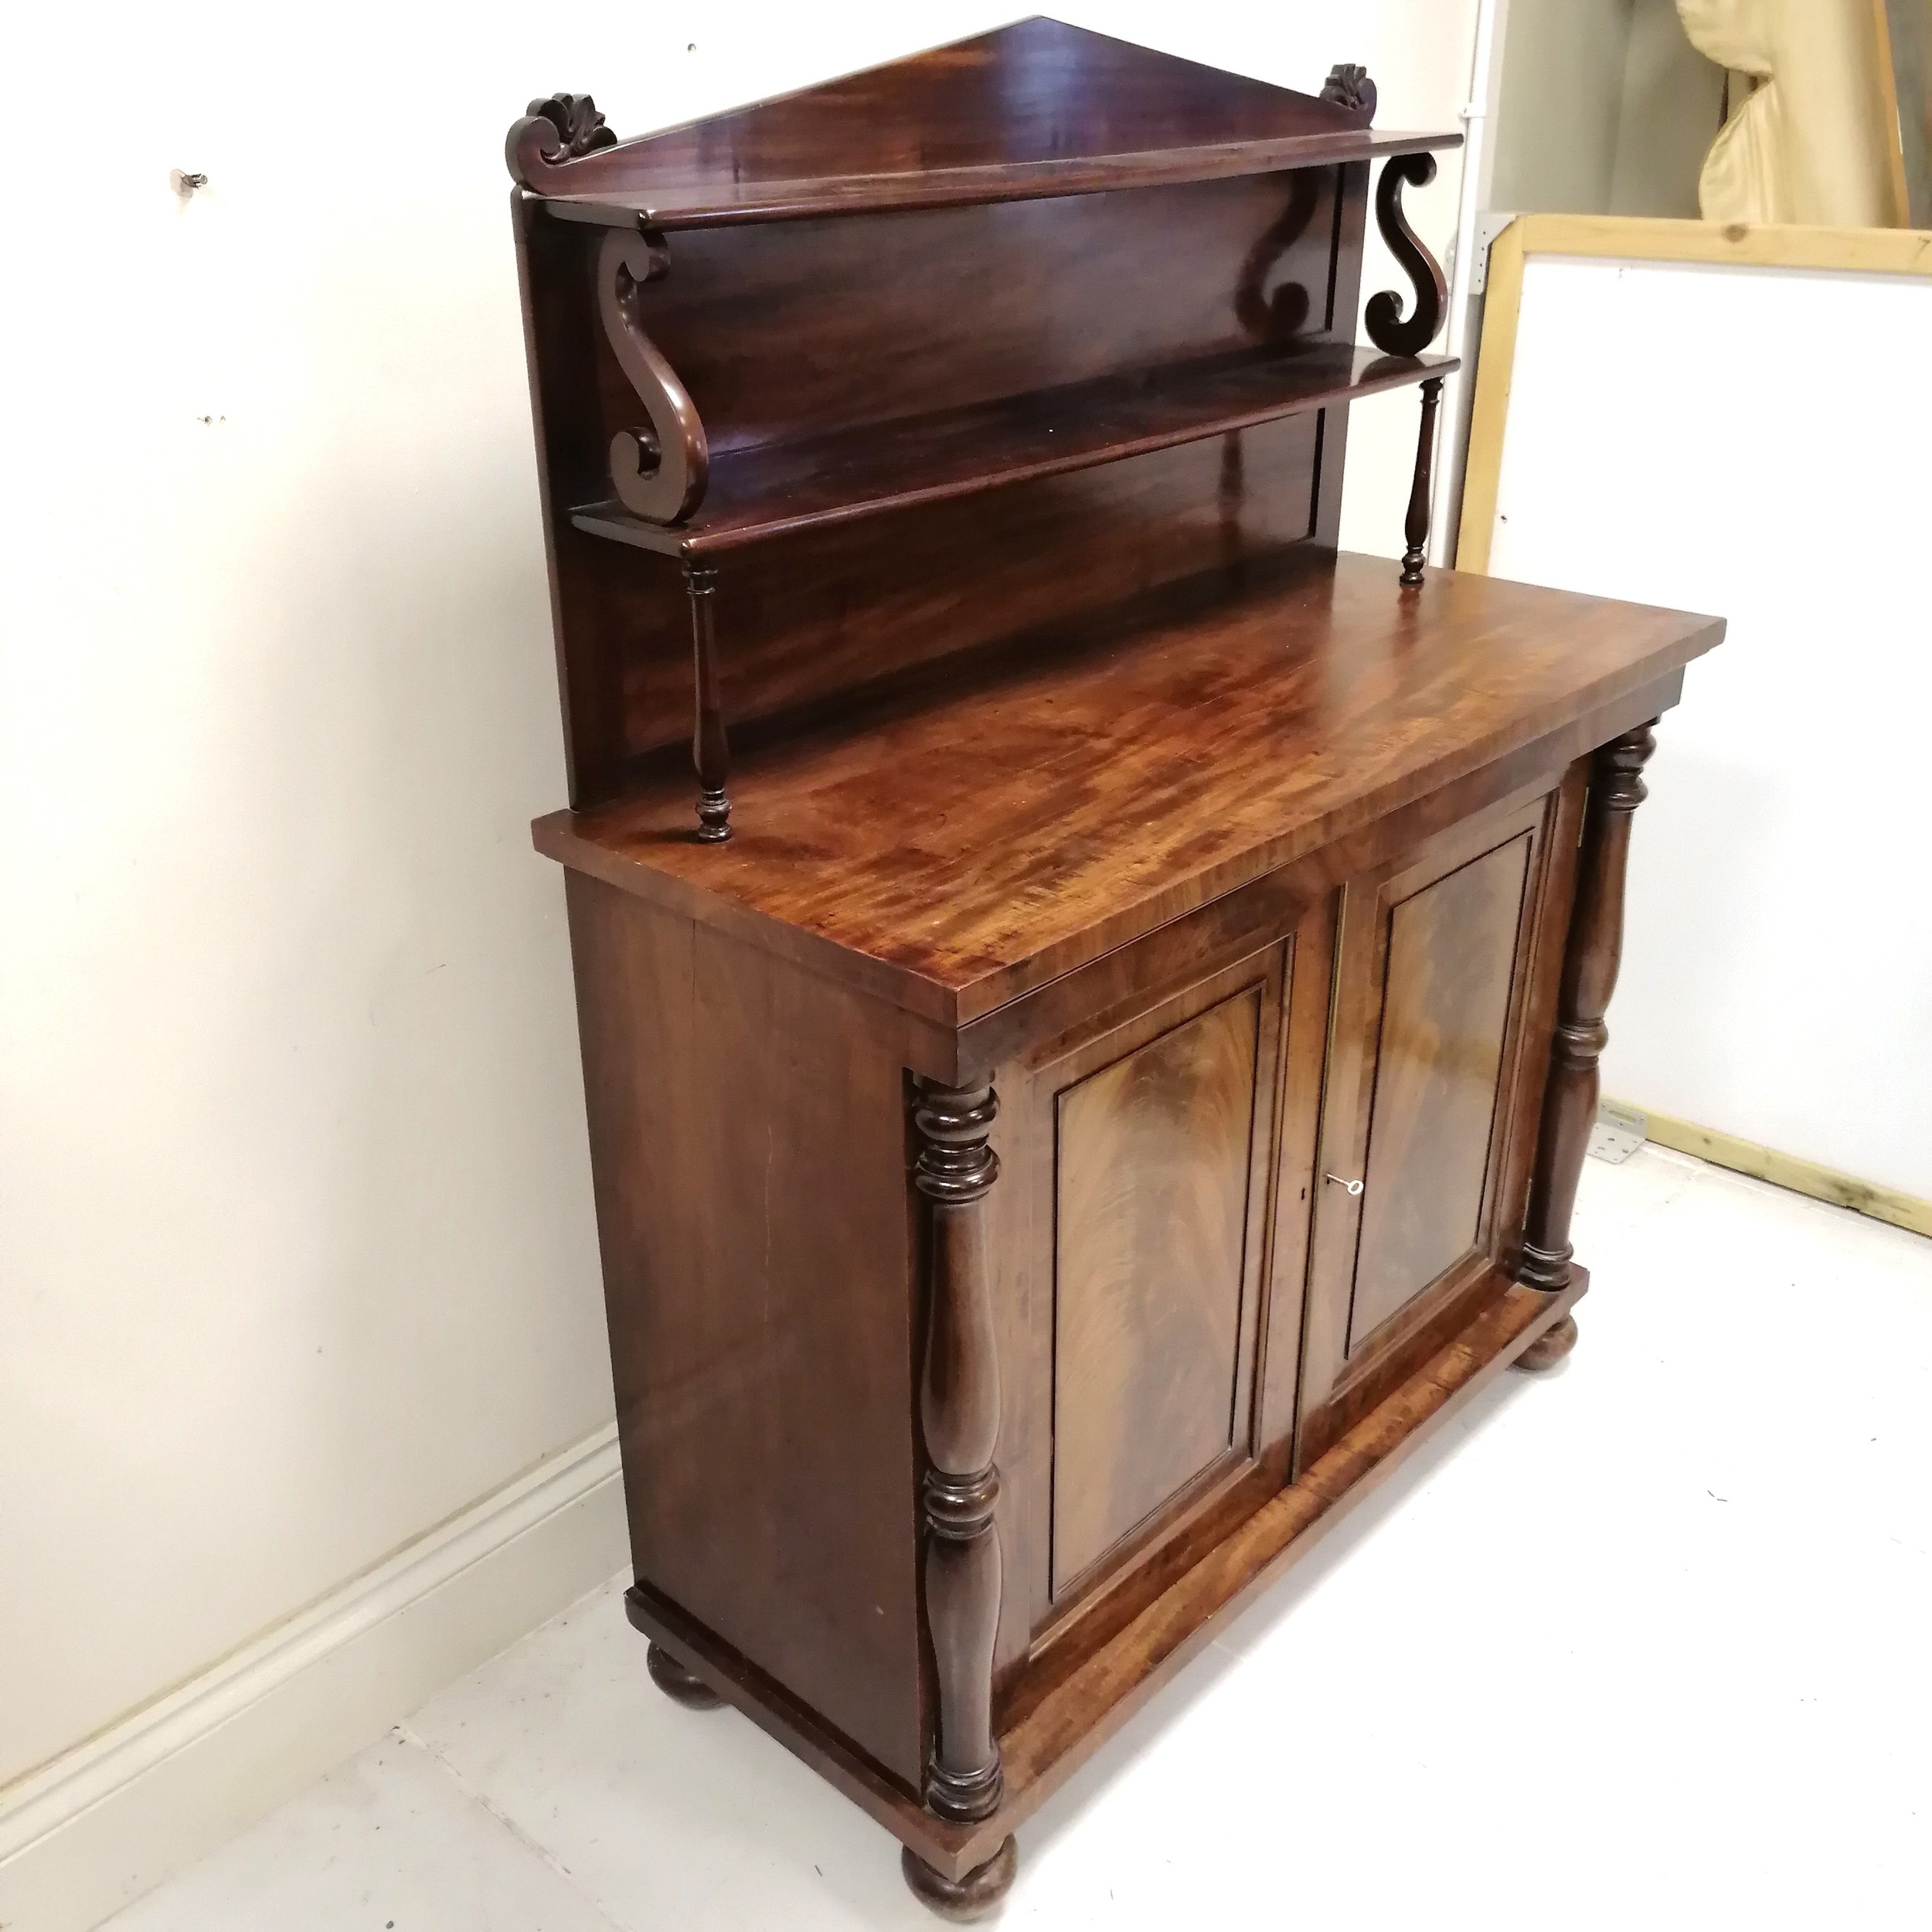 Antique mahogany chiffonier, 2 tier shelf above 2 door cupboard, flanked by turned column - Image 3 of 4